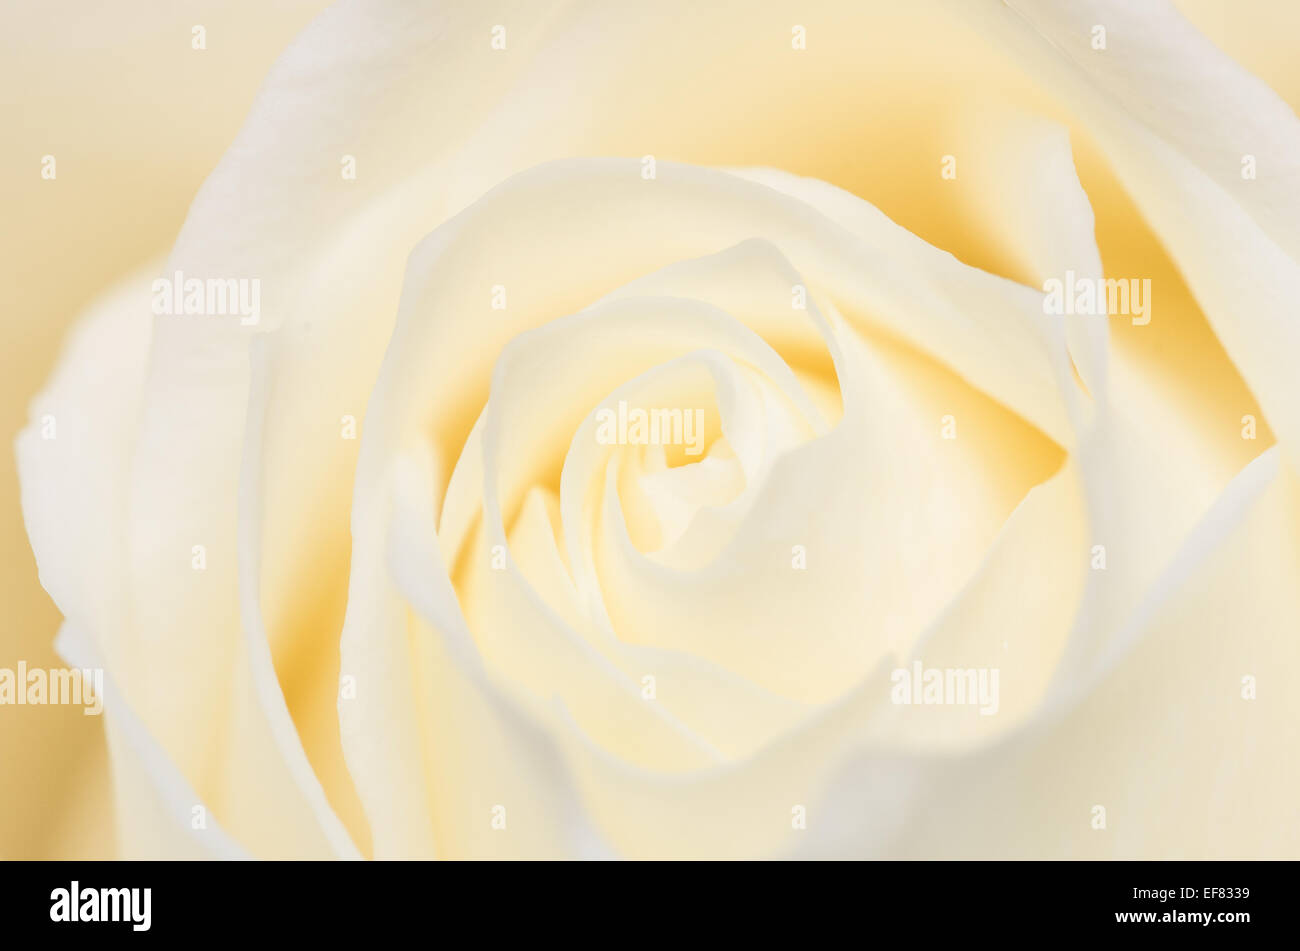 A delicate close up of the heart of a rose. I love the way the petals form a swirling pattern drawing the eye into the image. Stock Photo